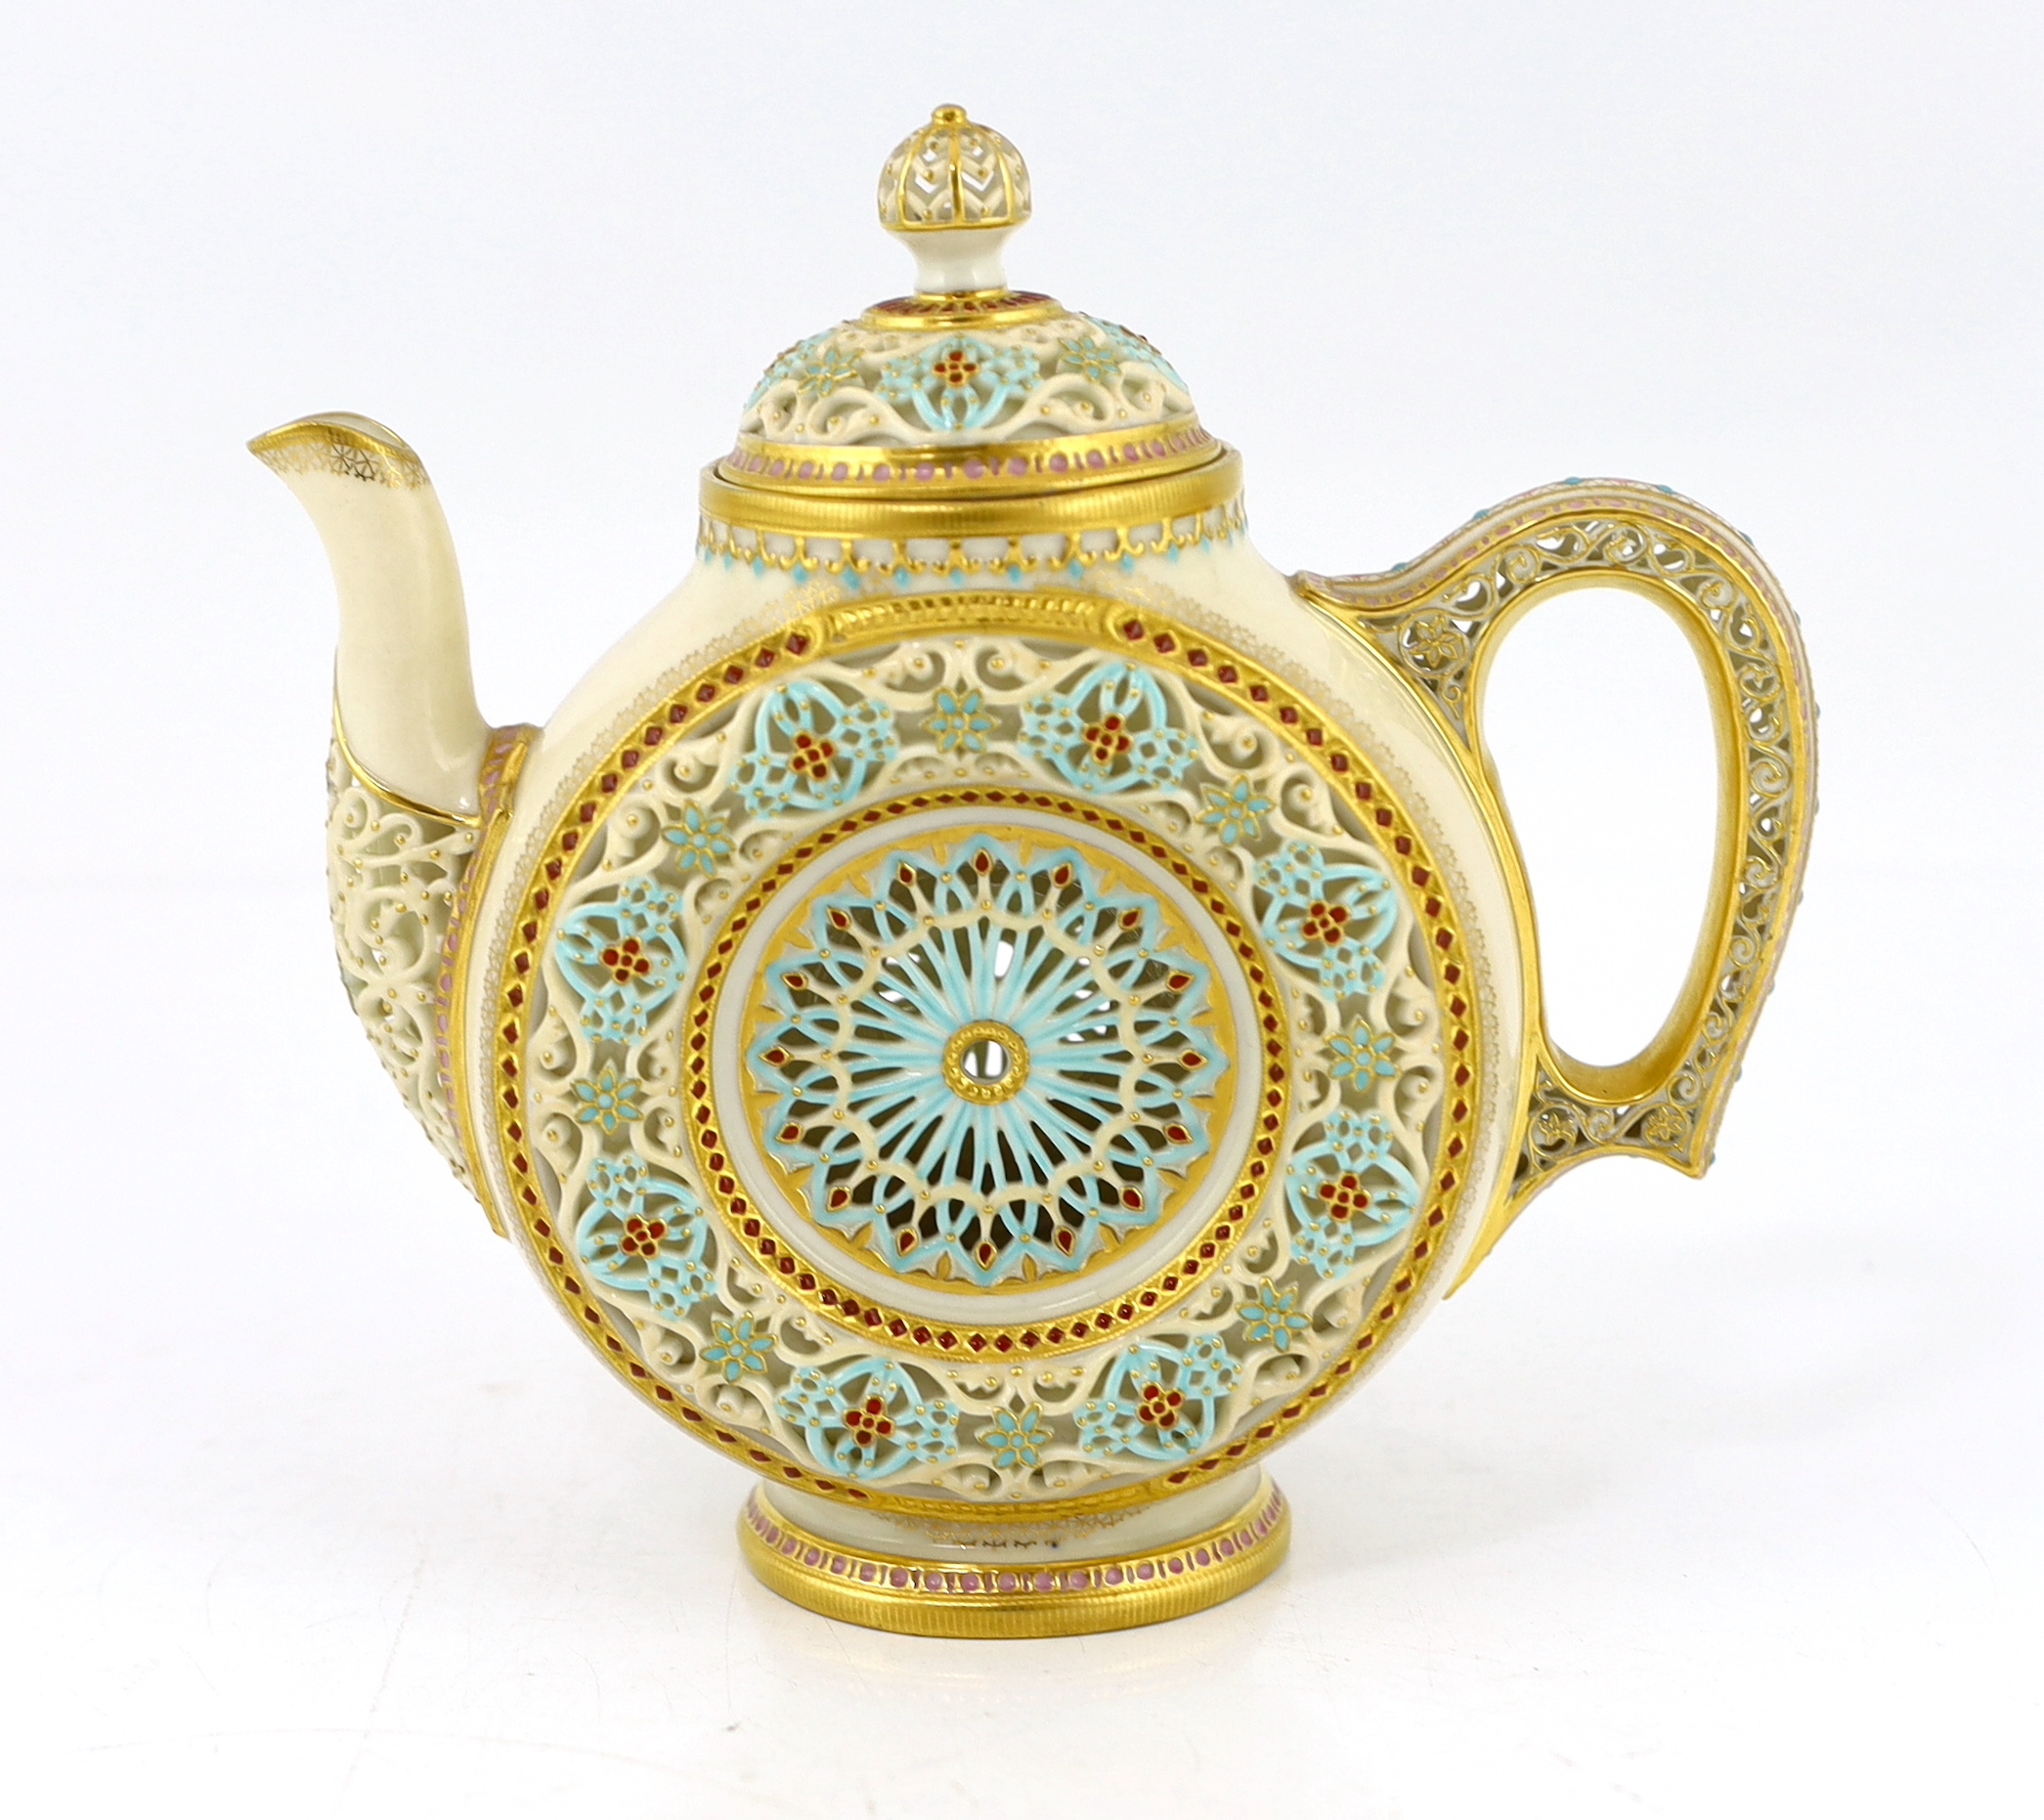 A fine and rare Royal Worcester reticulated teapot and cover, designed by George Owen, c.1881